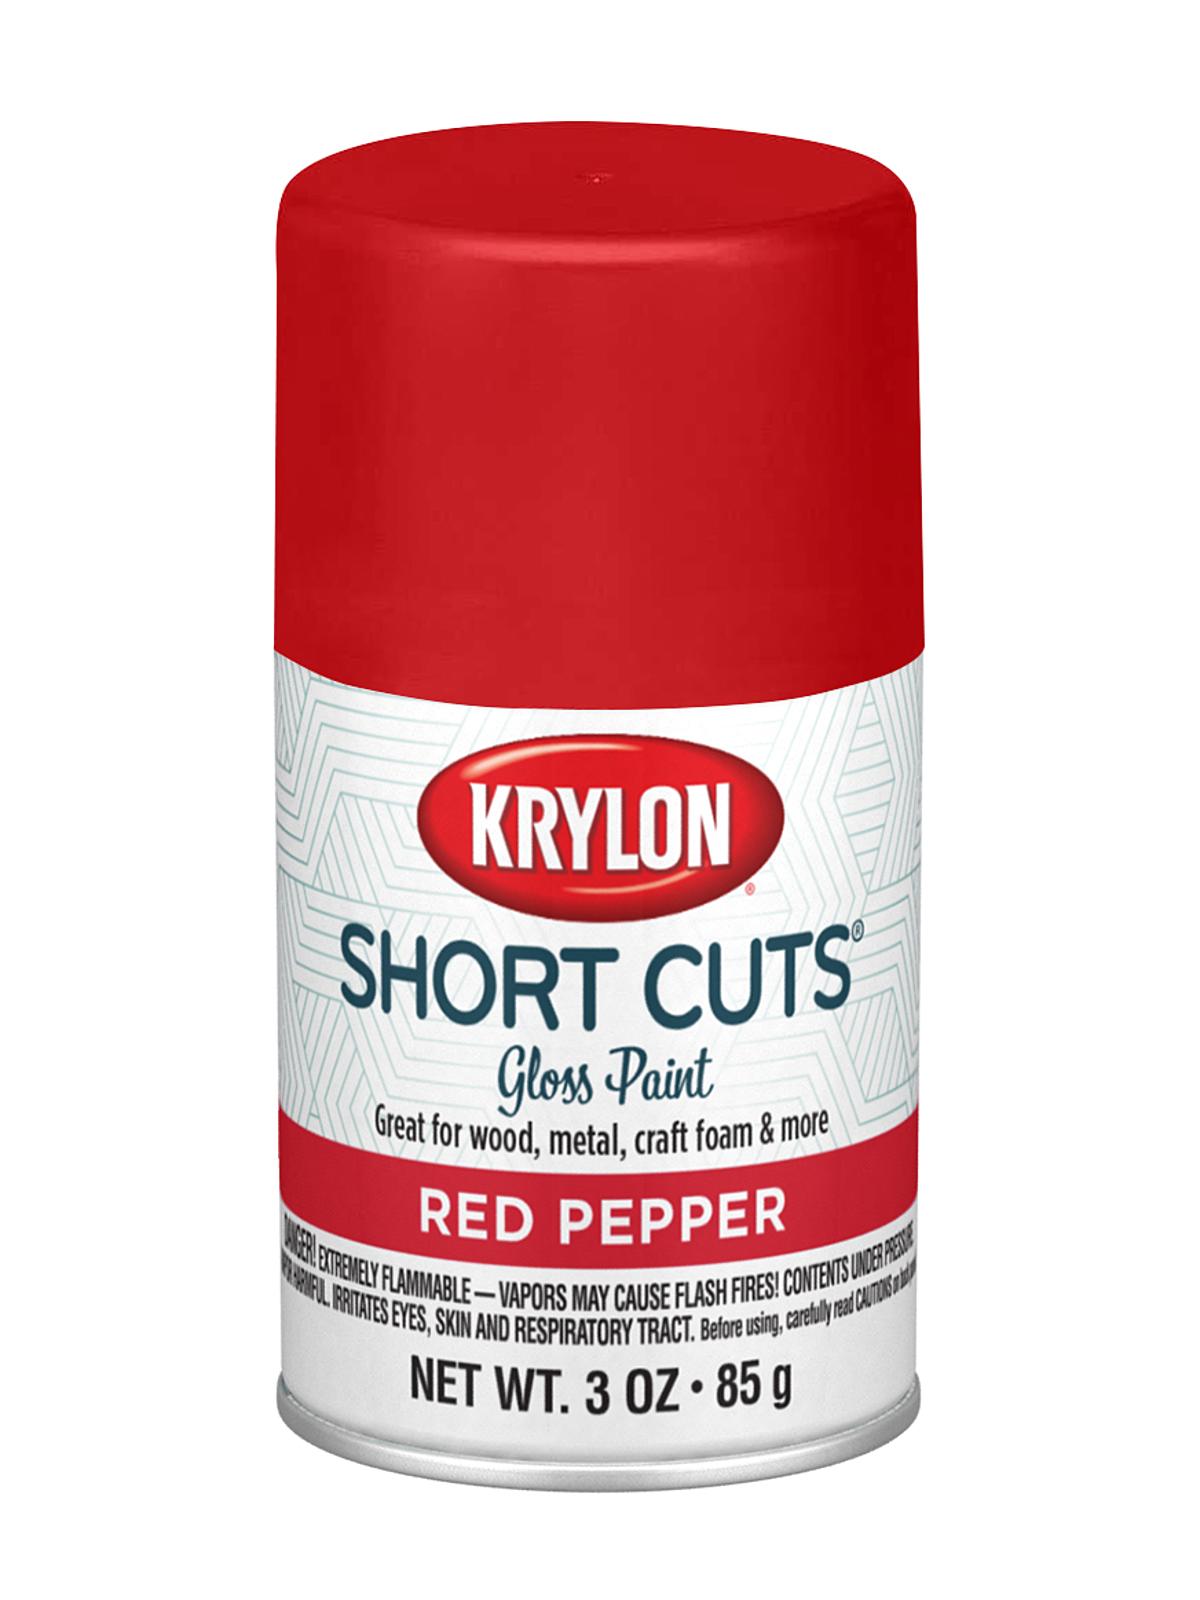 Short Cuts Red Pepper 1 Oz. Brush-on